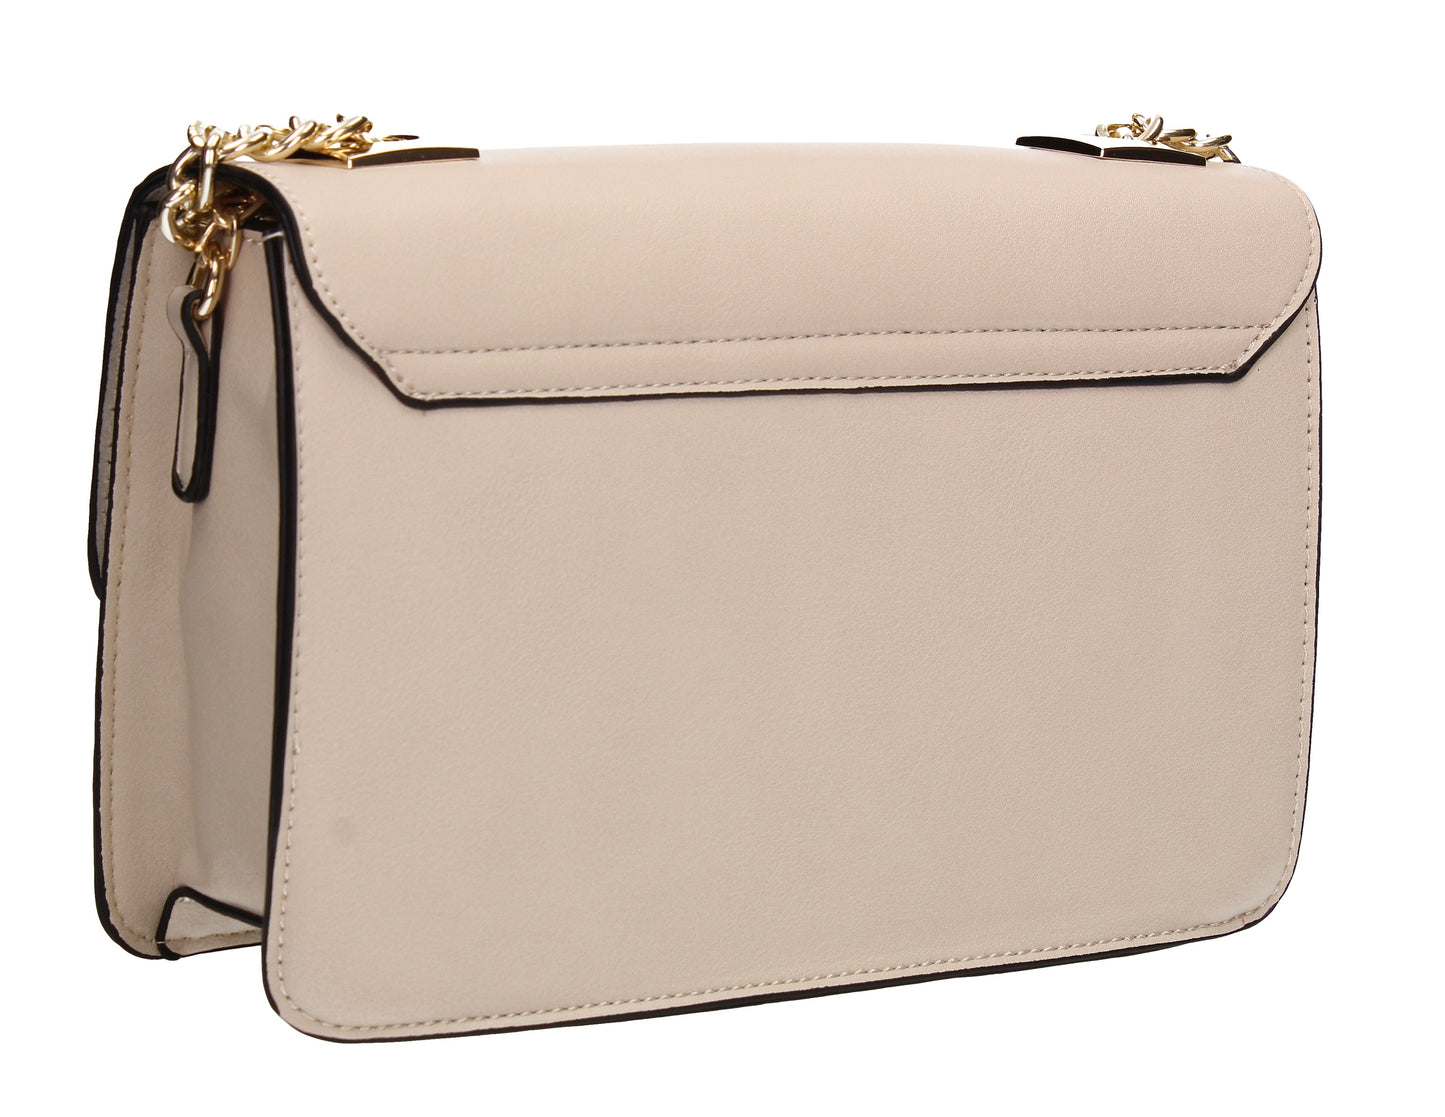 Swanky Swans Silvia Clutch Bag Beige Perfect for Back To School!